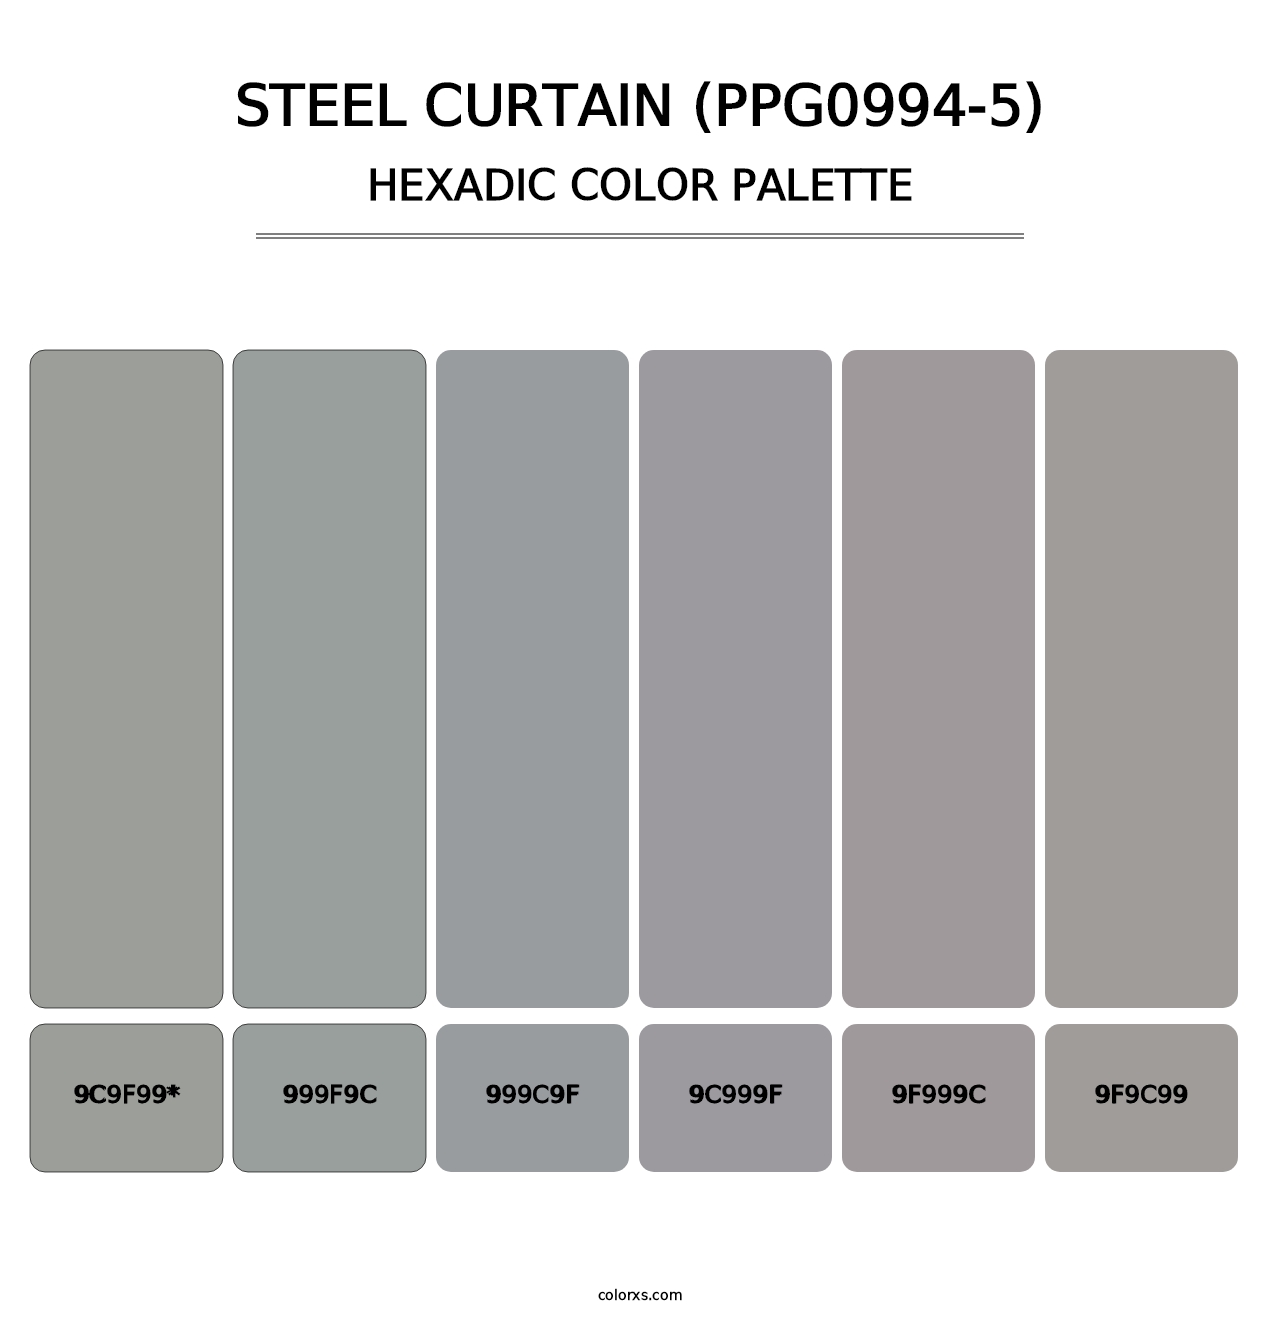 Steel Curtain (PPG0994-5) - Hexadic Color Palette